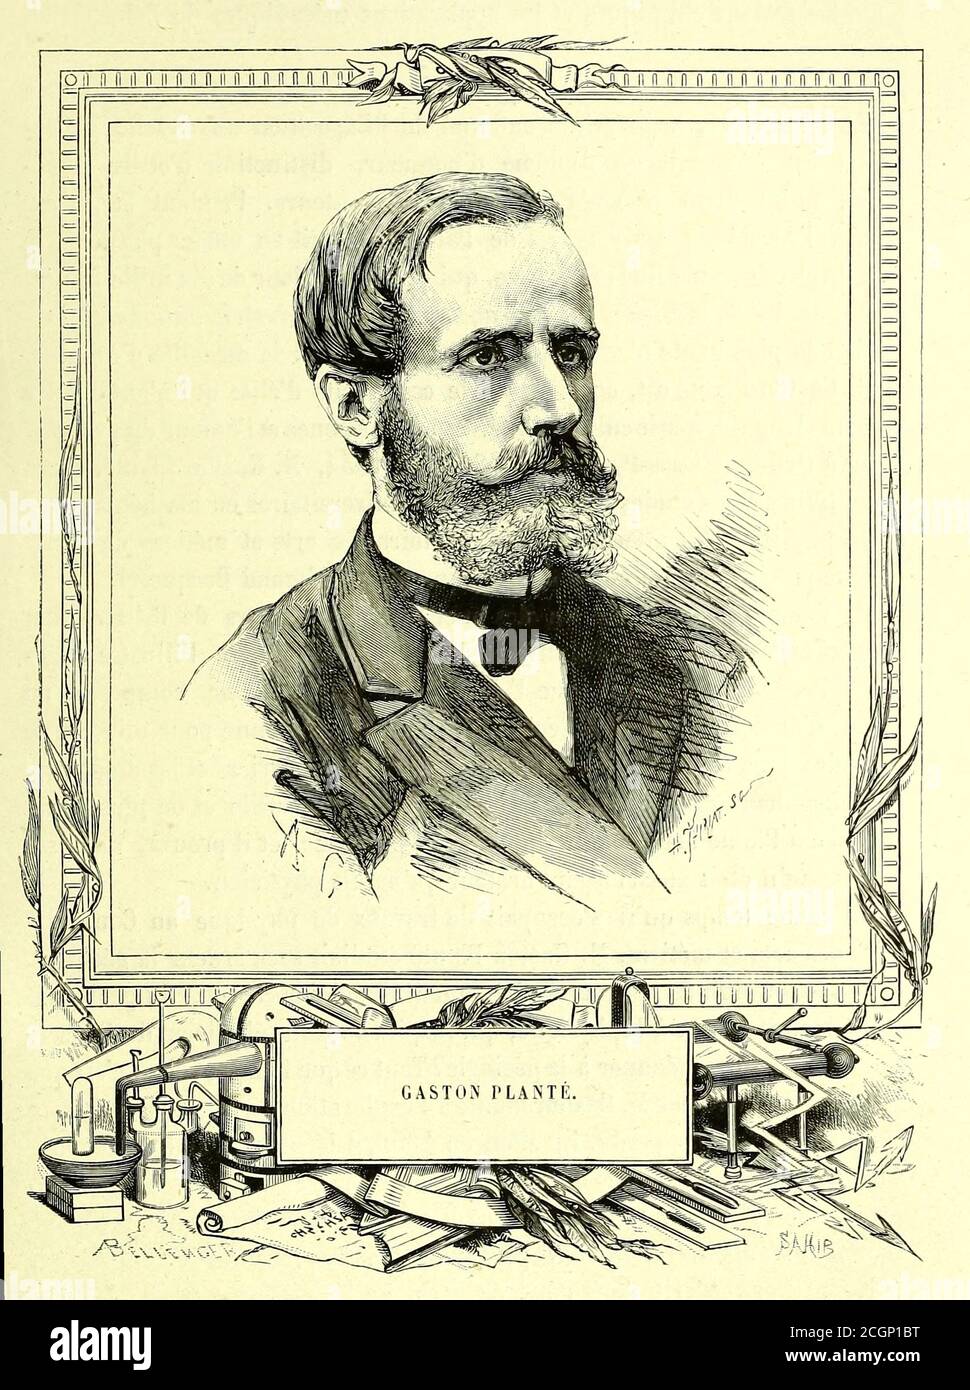 Gaston Planté (22 April 1834 – 21 May 1889) was a French physicist who invented the lead–acid battery in 1859. This type battery was developed as the first rechargeable electric battery marketed for commercial use and it is widely used in automobiles. From the Book Les merveilles de la science, ou Description populaire des inventions modernes [The Wonders of Science, or Popular Description of Modern Inventions] by Figuier, Louis, 1819-1894 Published in Paris 1867 Stock Photo